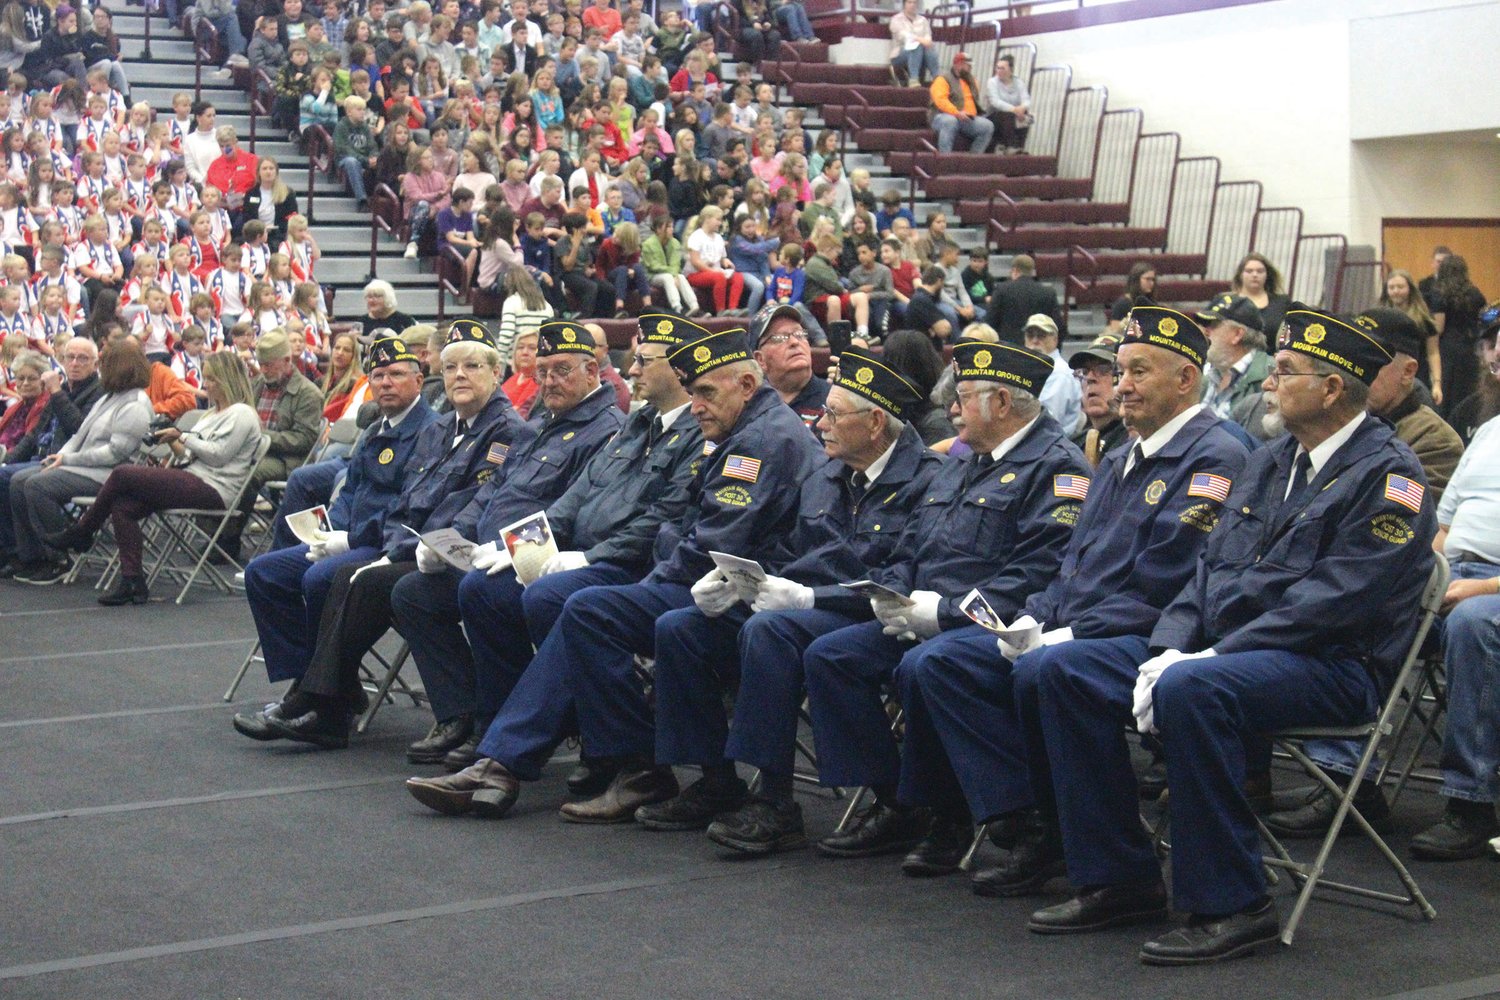 Several members of the American Legion Post No. 30 sit in the front row during the 14th Annual Veterans Day Celebration at Mountain Grove High School.